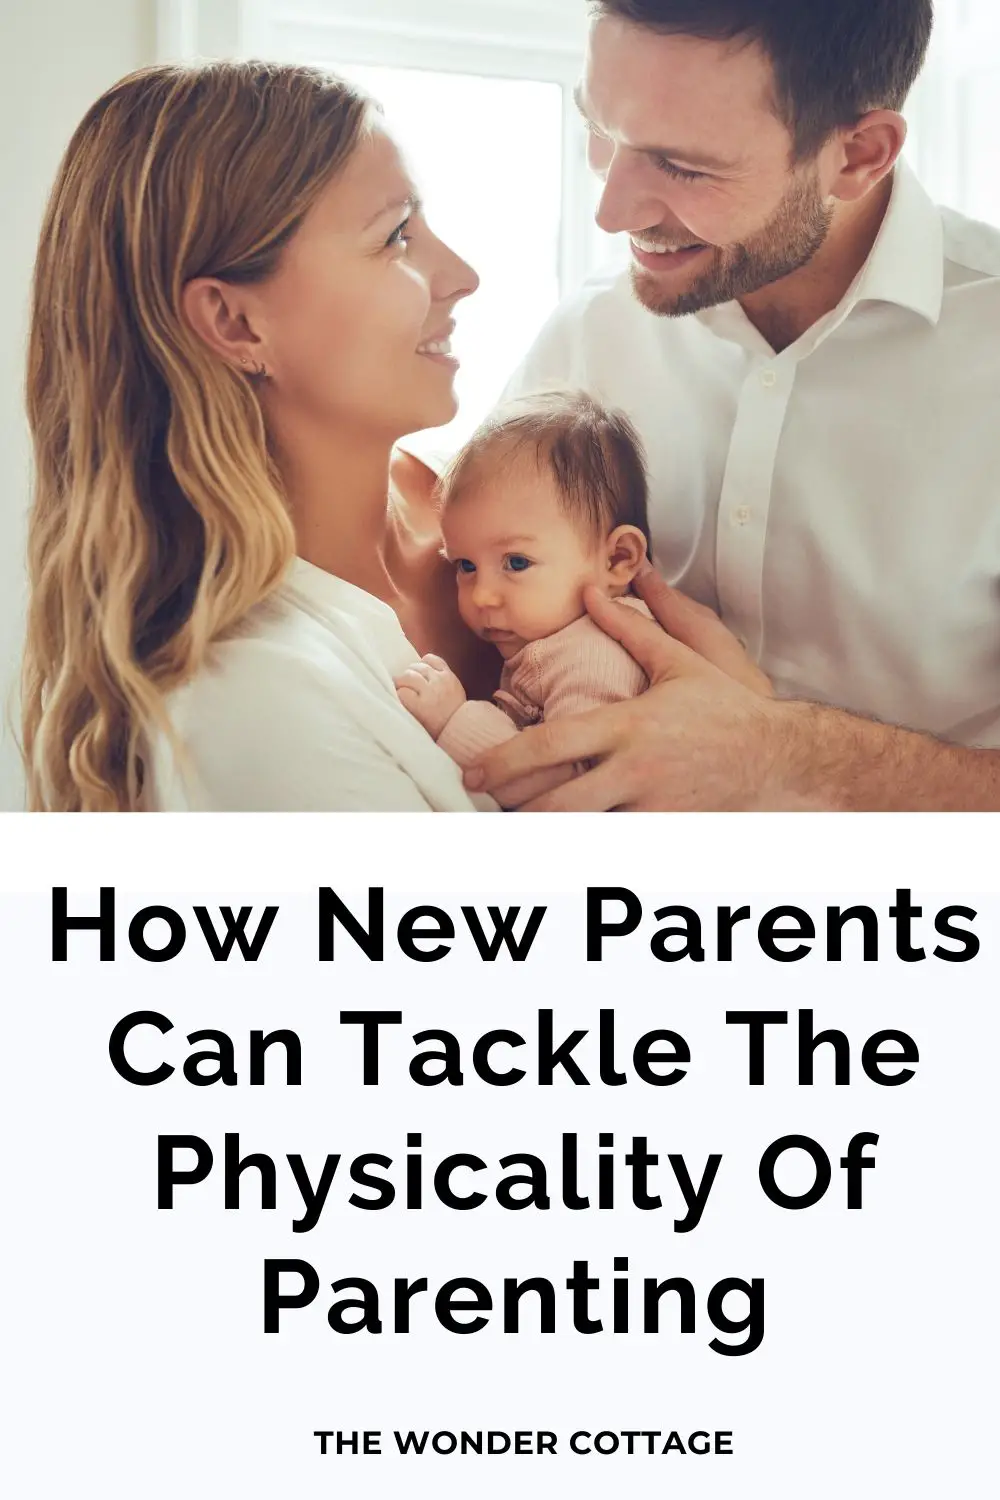 How new parents can tackle the physicality of parenting